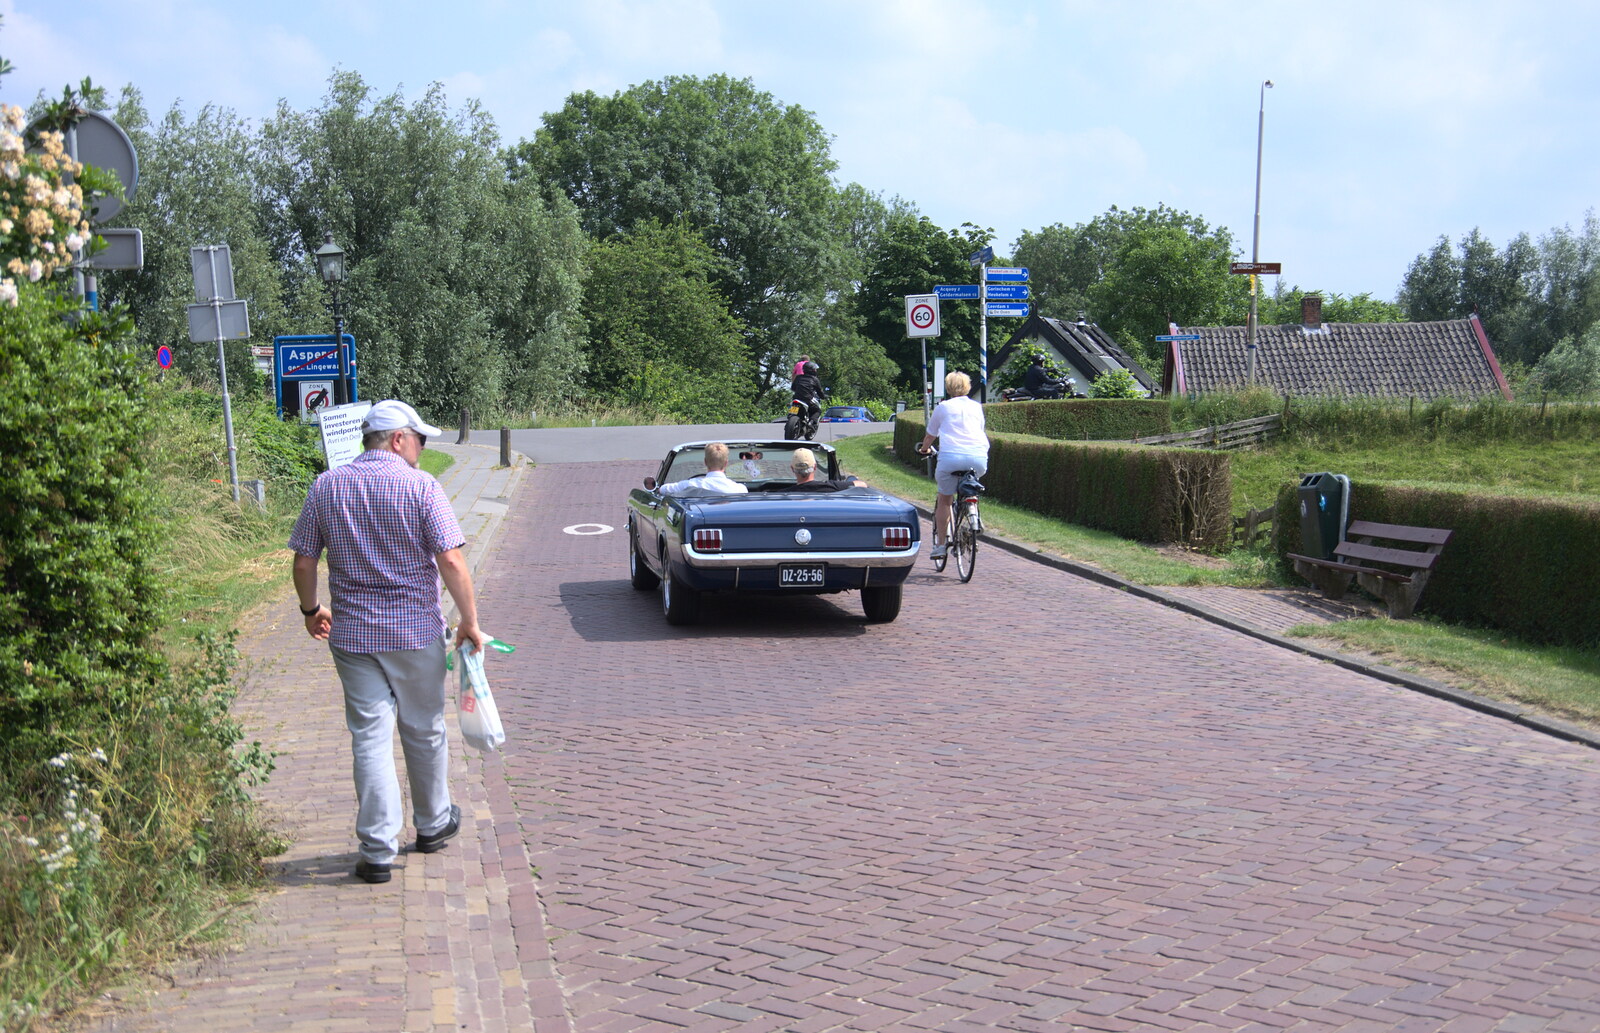 Another classic car drives by from A Postcard From Asperen, Gelderland, Netherlands - 9th June 2018